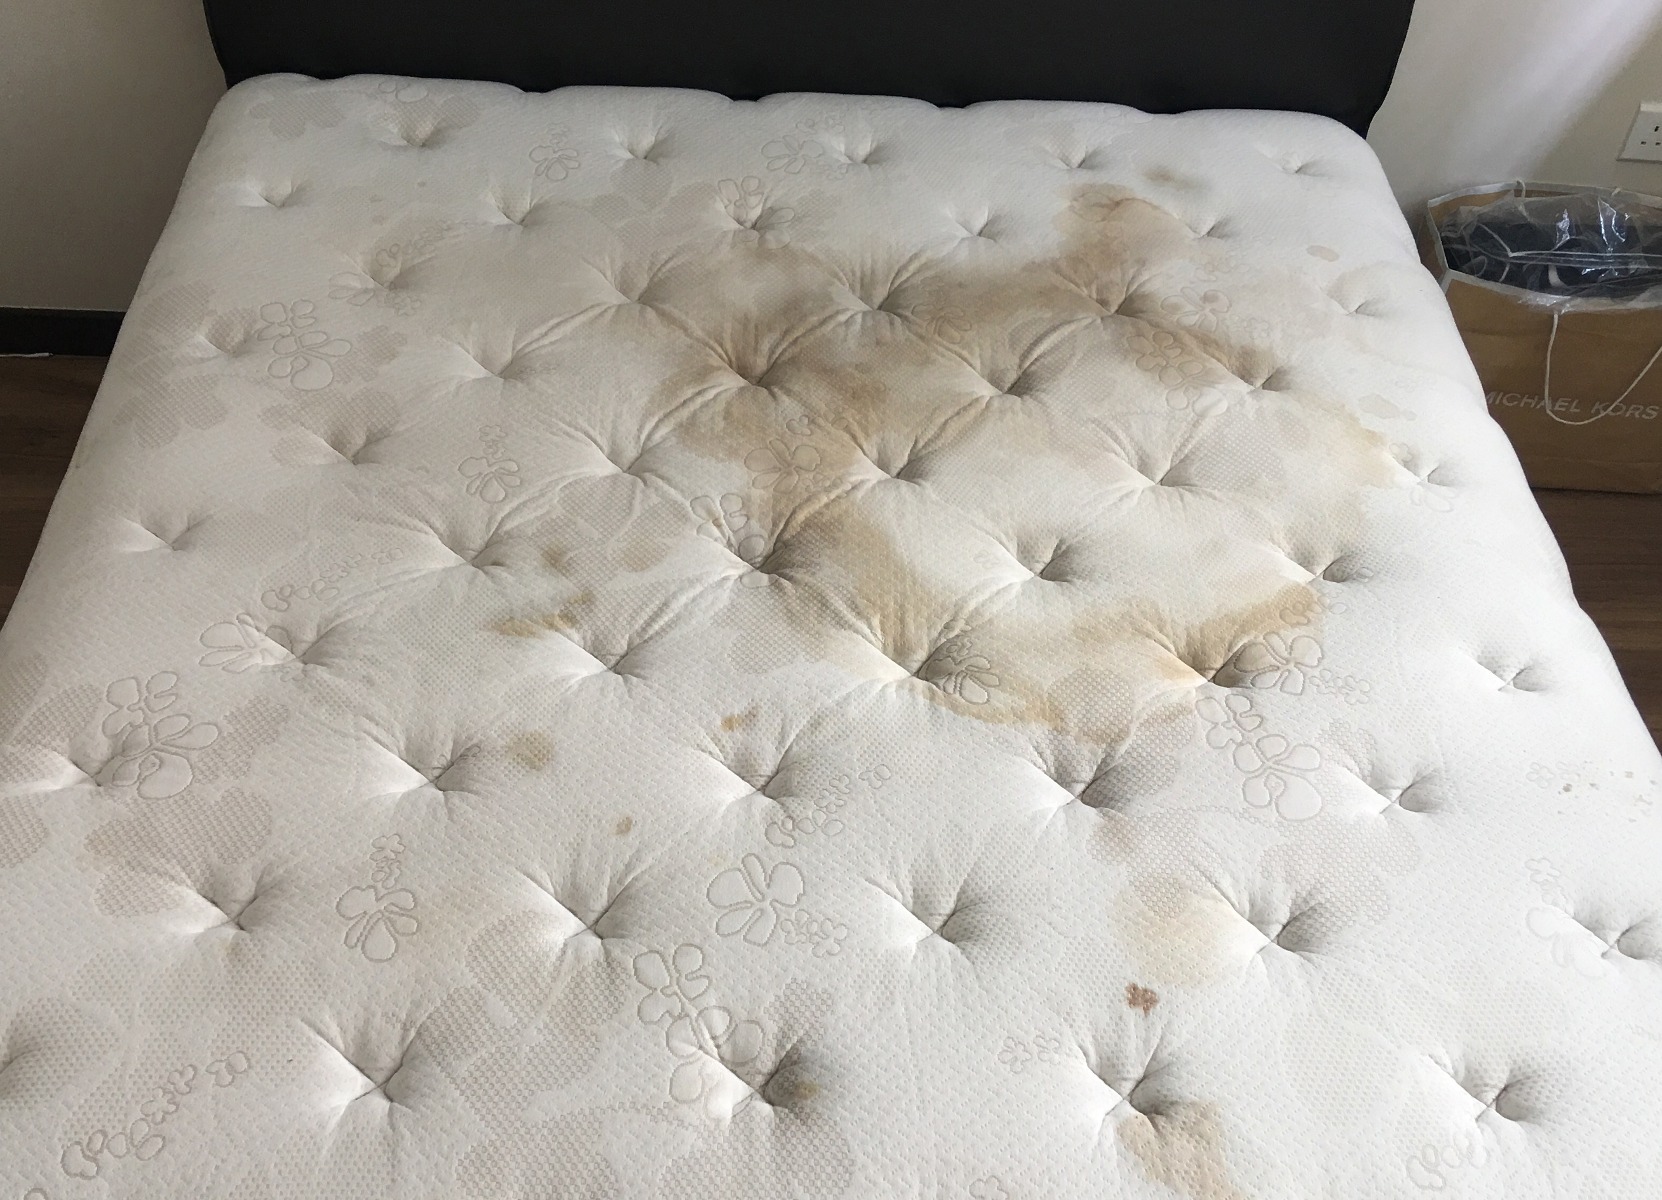 Before Mattress Cleaning